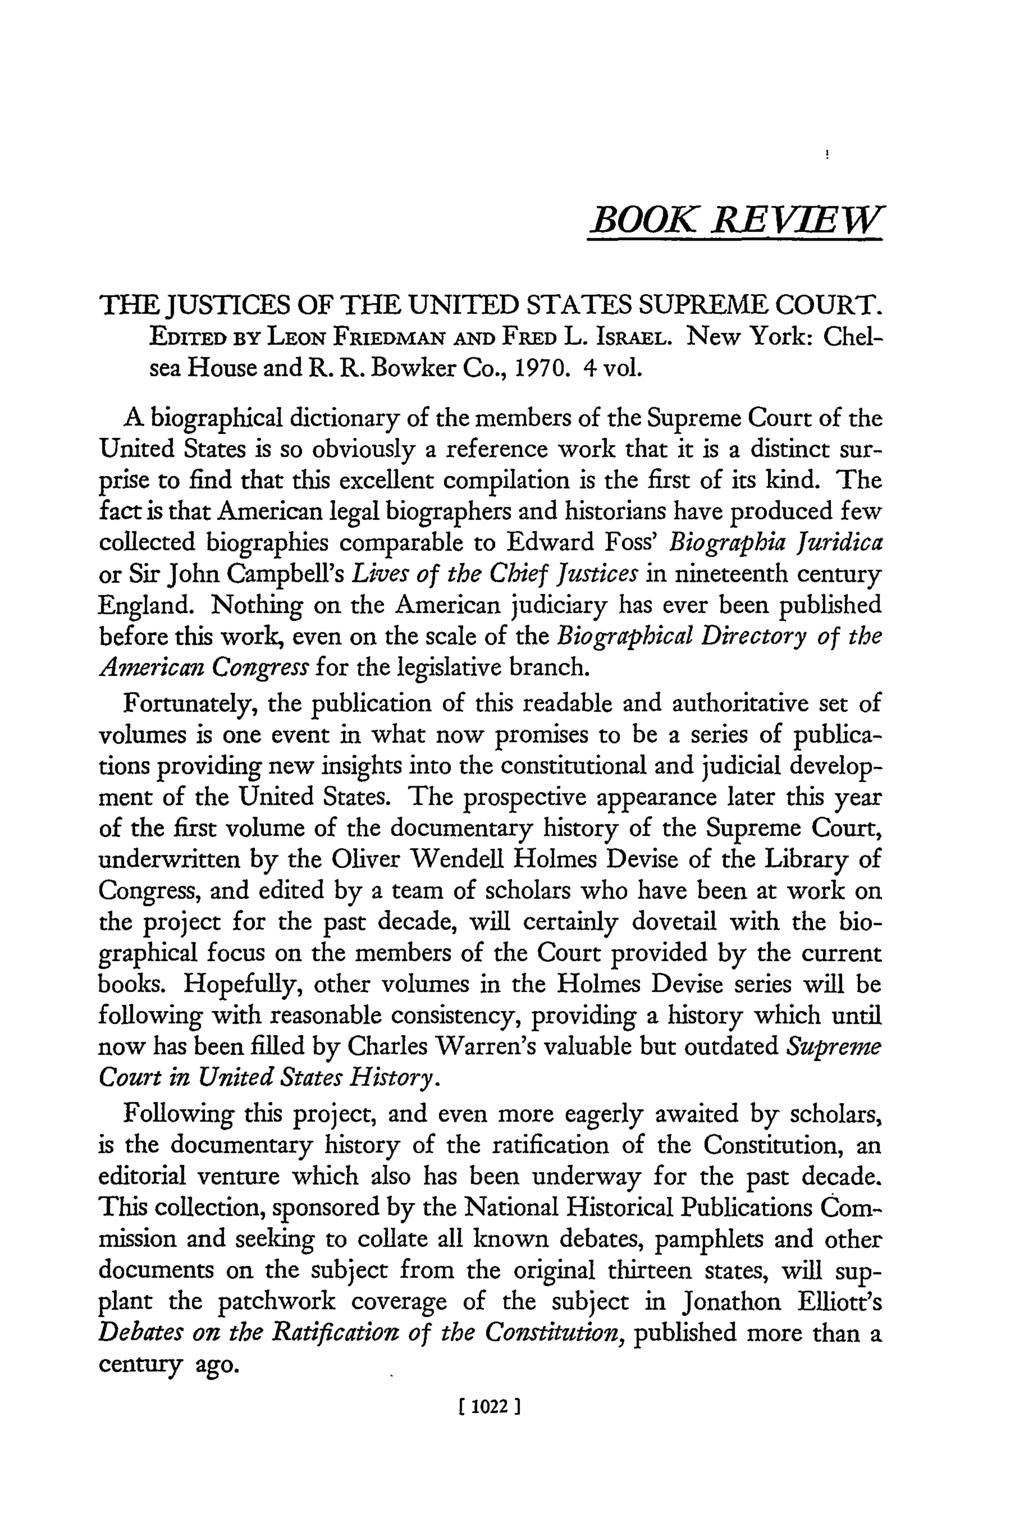 BOOK REVIEW THE JUSTICES OF THE UNITED STATES SUPREME COURT. EDITED BY LEON FRIEDMAN AND FRED L. ISRAEL. New York: Chelsea House and R. R. Bowker Co., 1970. 4 vol.